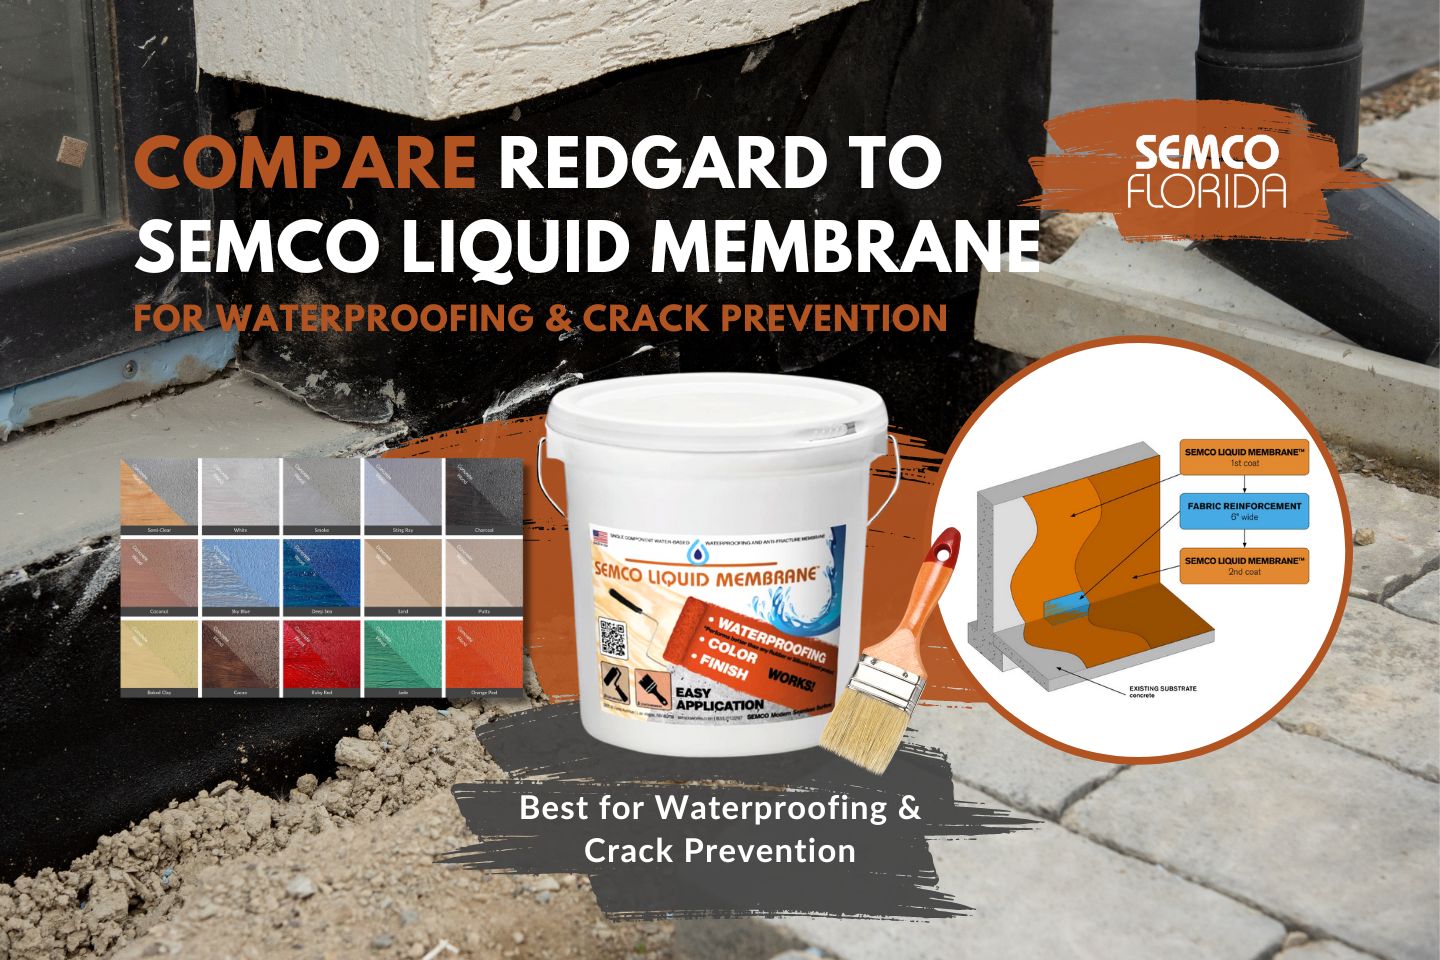 Compare RedGard to SEMCO Liquid Membrane for Waterproofing and Crack Prevention